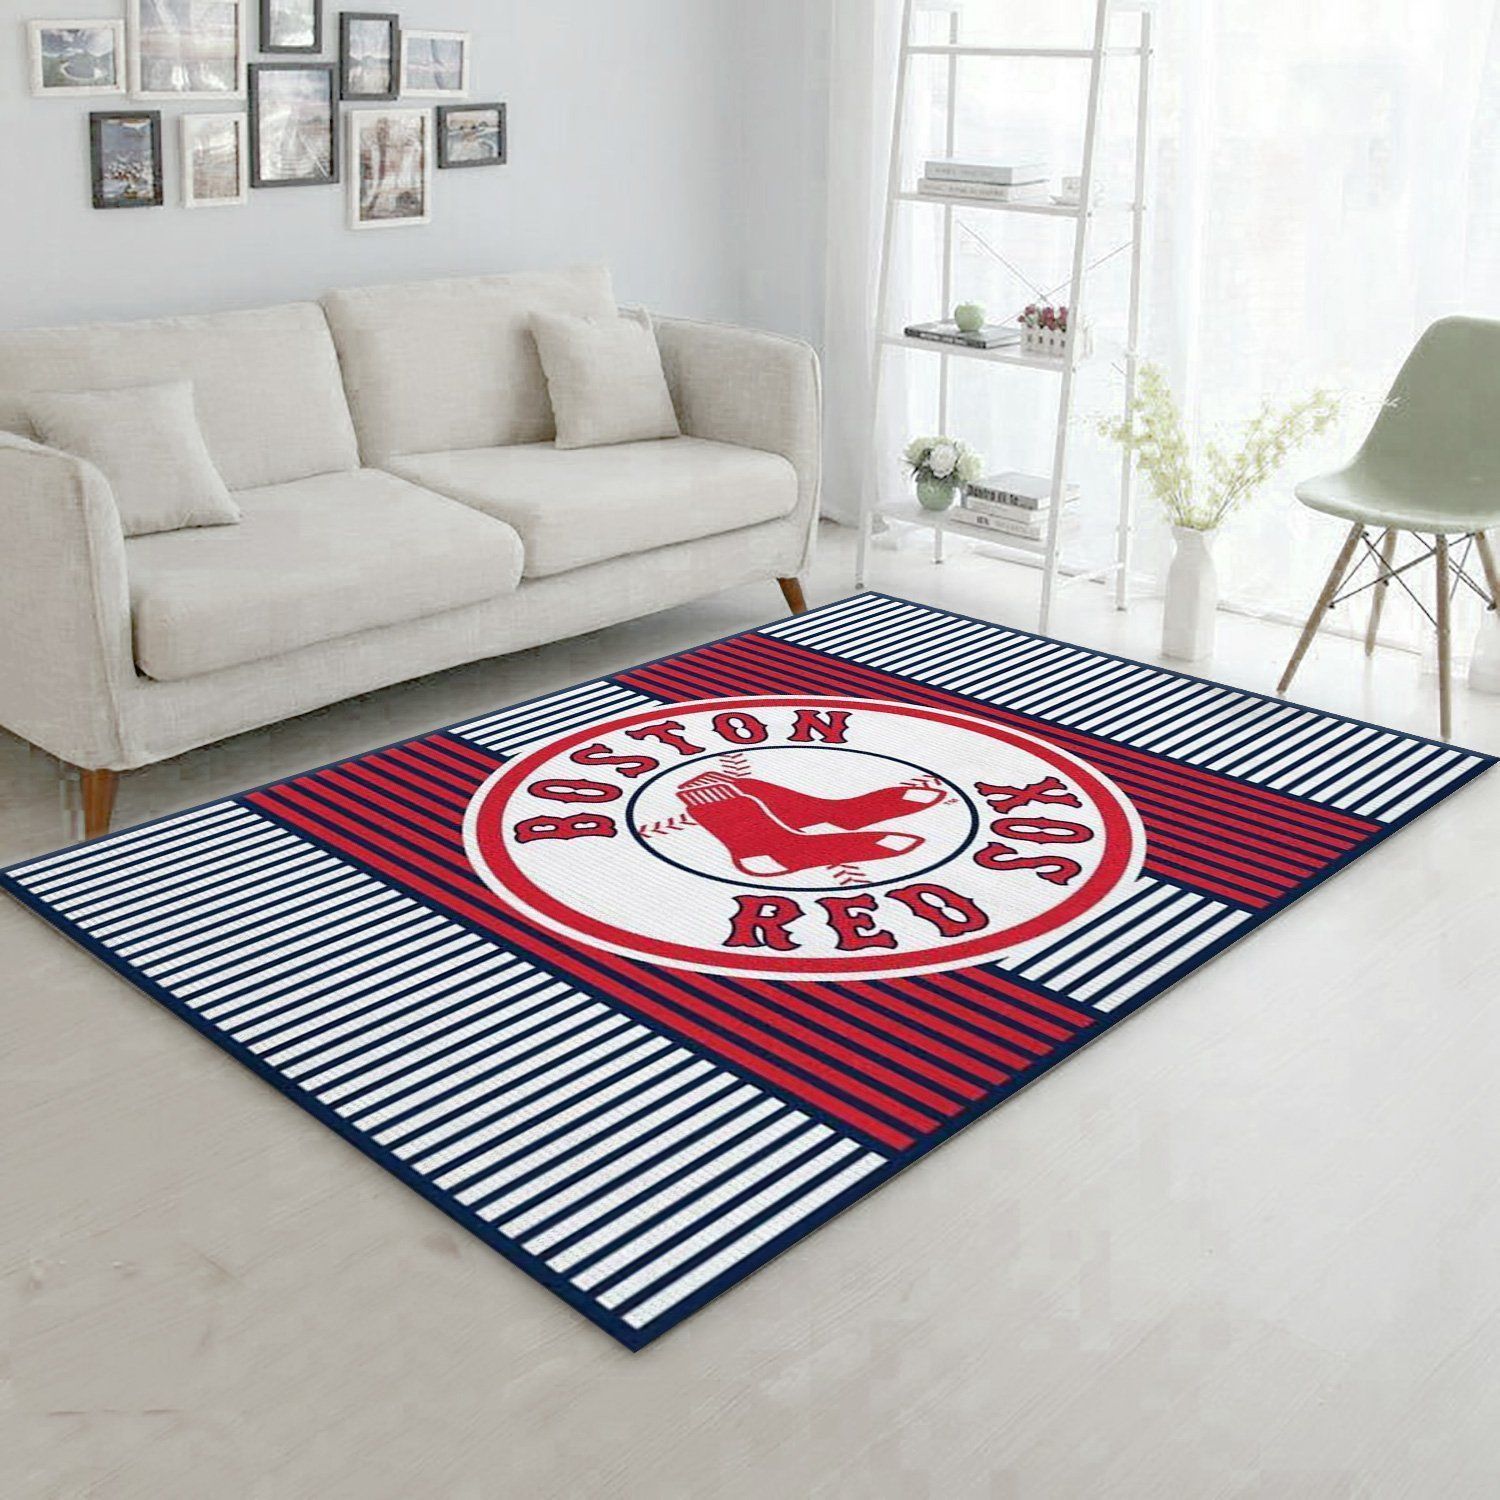 Boston Red Sox Imperial Champion Rug Area Rug For Christmas, Living room and bedroom Rug, Family Gift US Decor - Indoor Outdoor Rugs